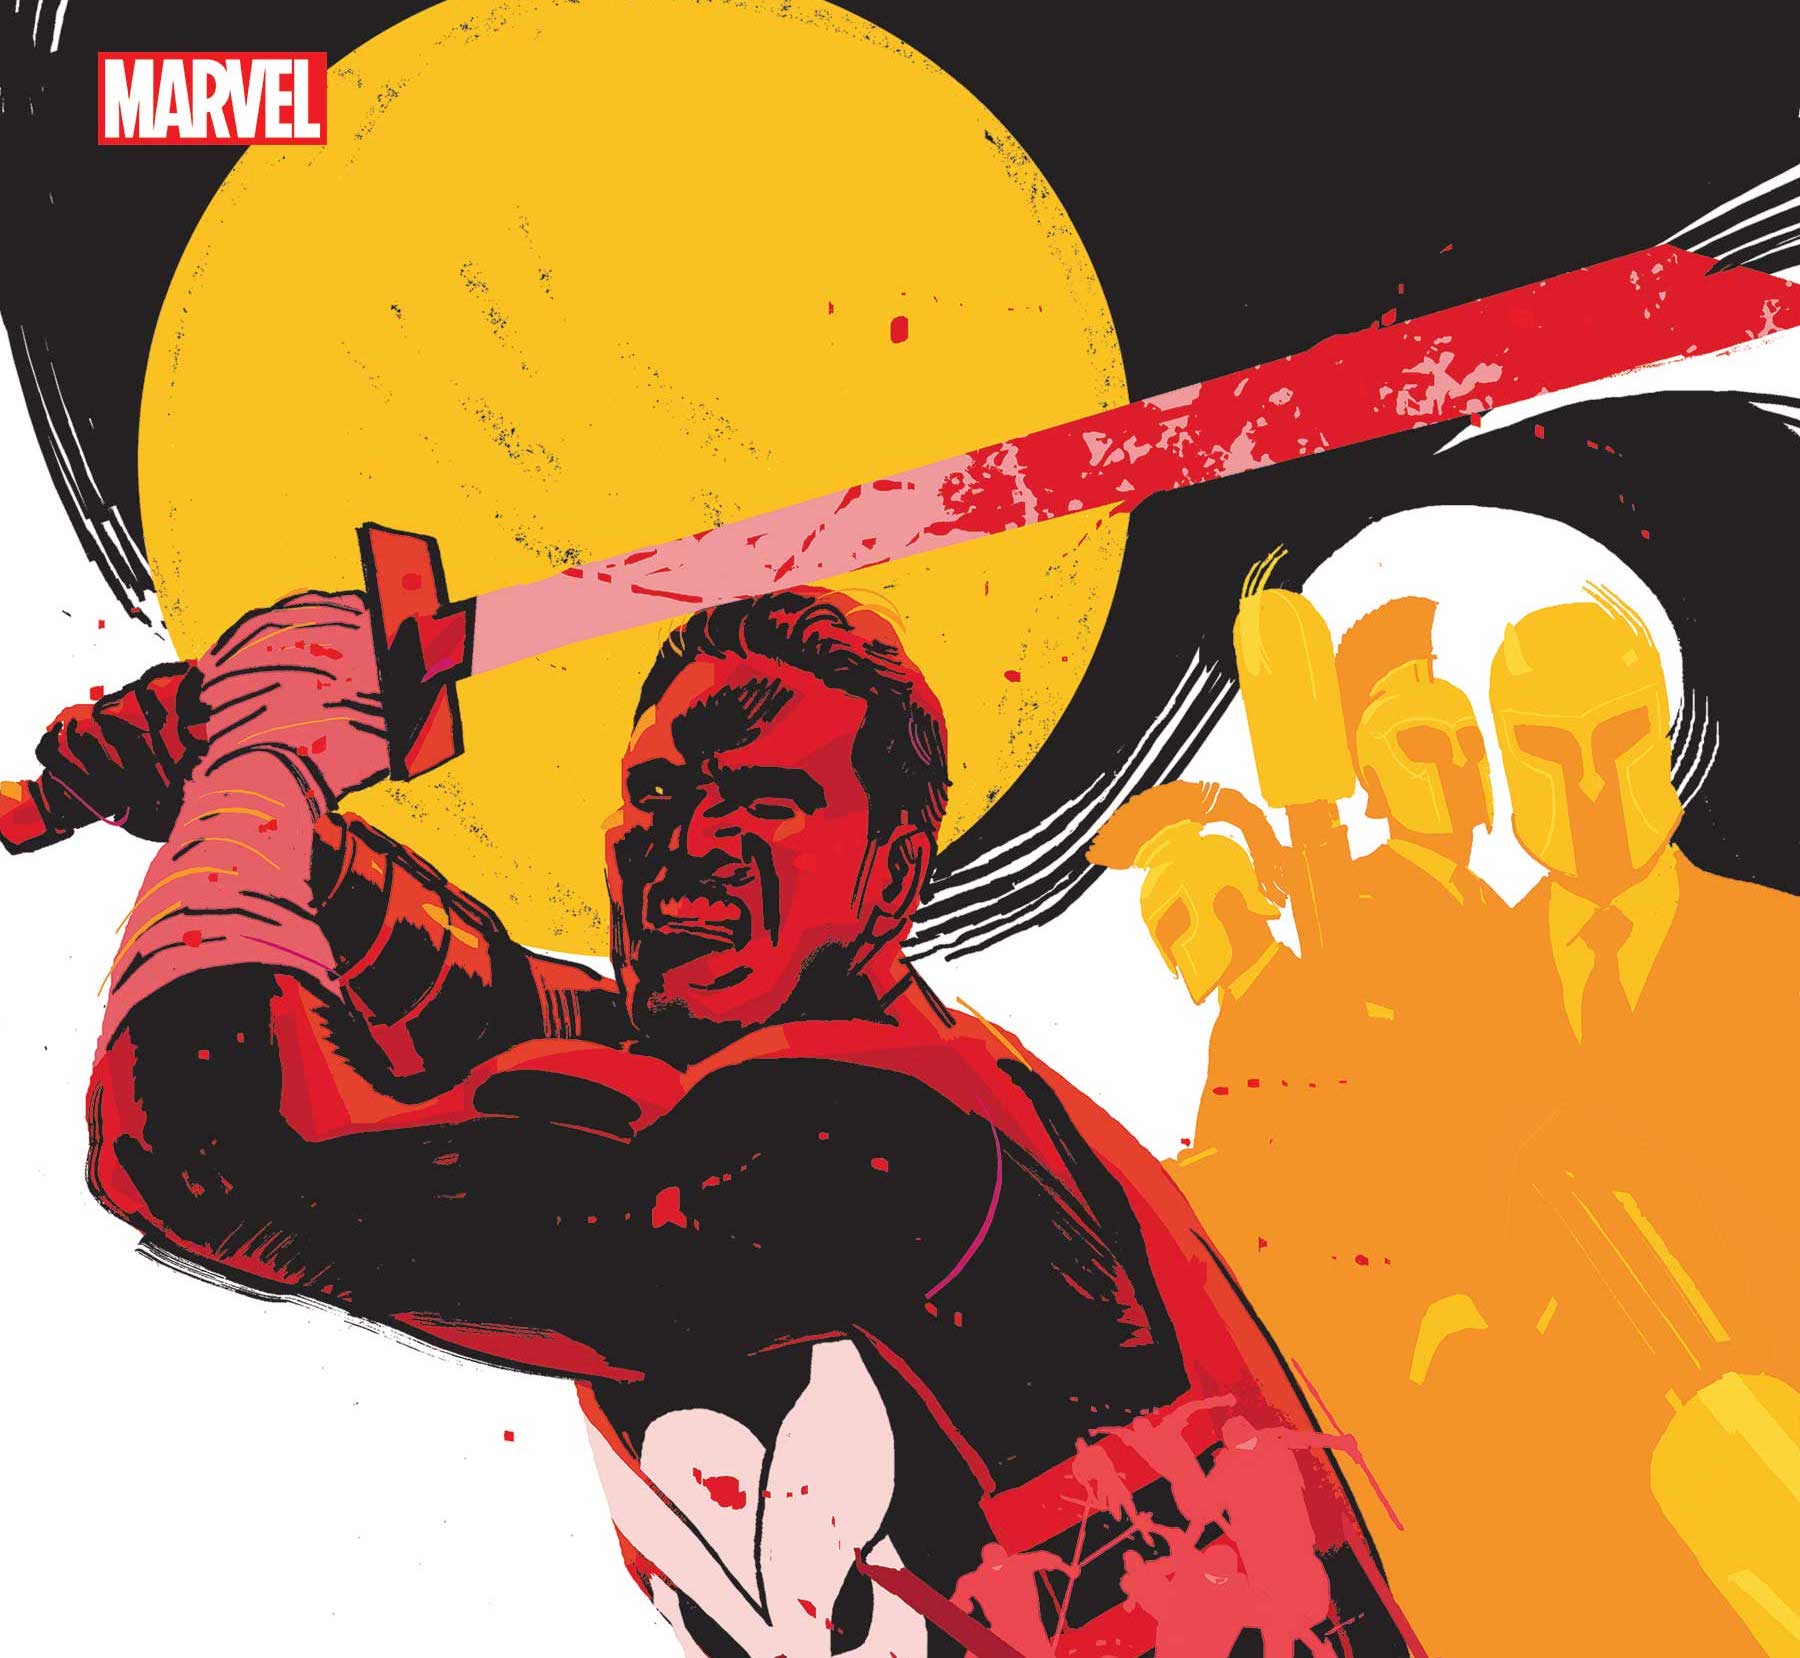 'Punisher' #2 will make you a believer in Frank's new direction